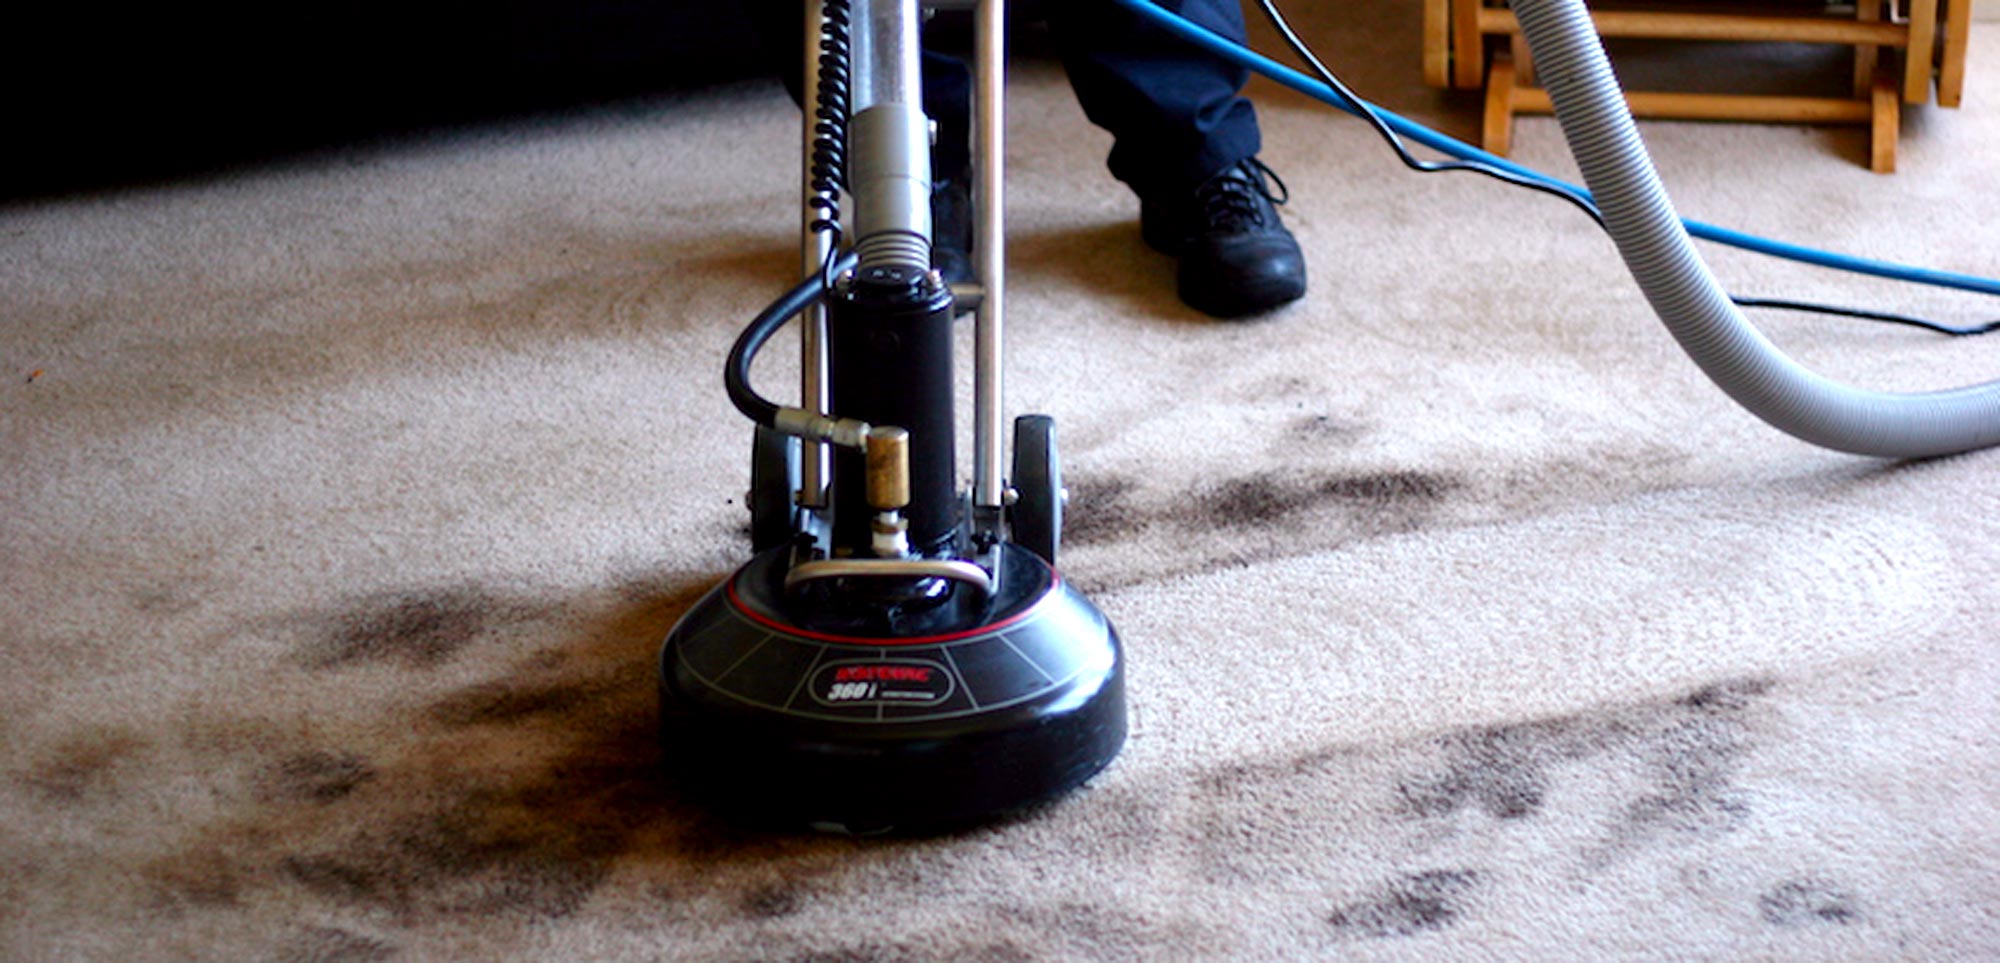 Rotovac Cleaning System